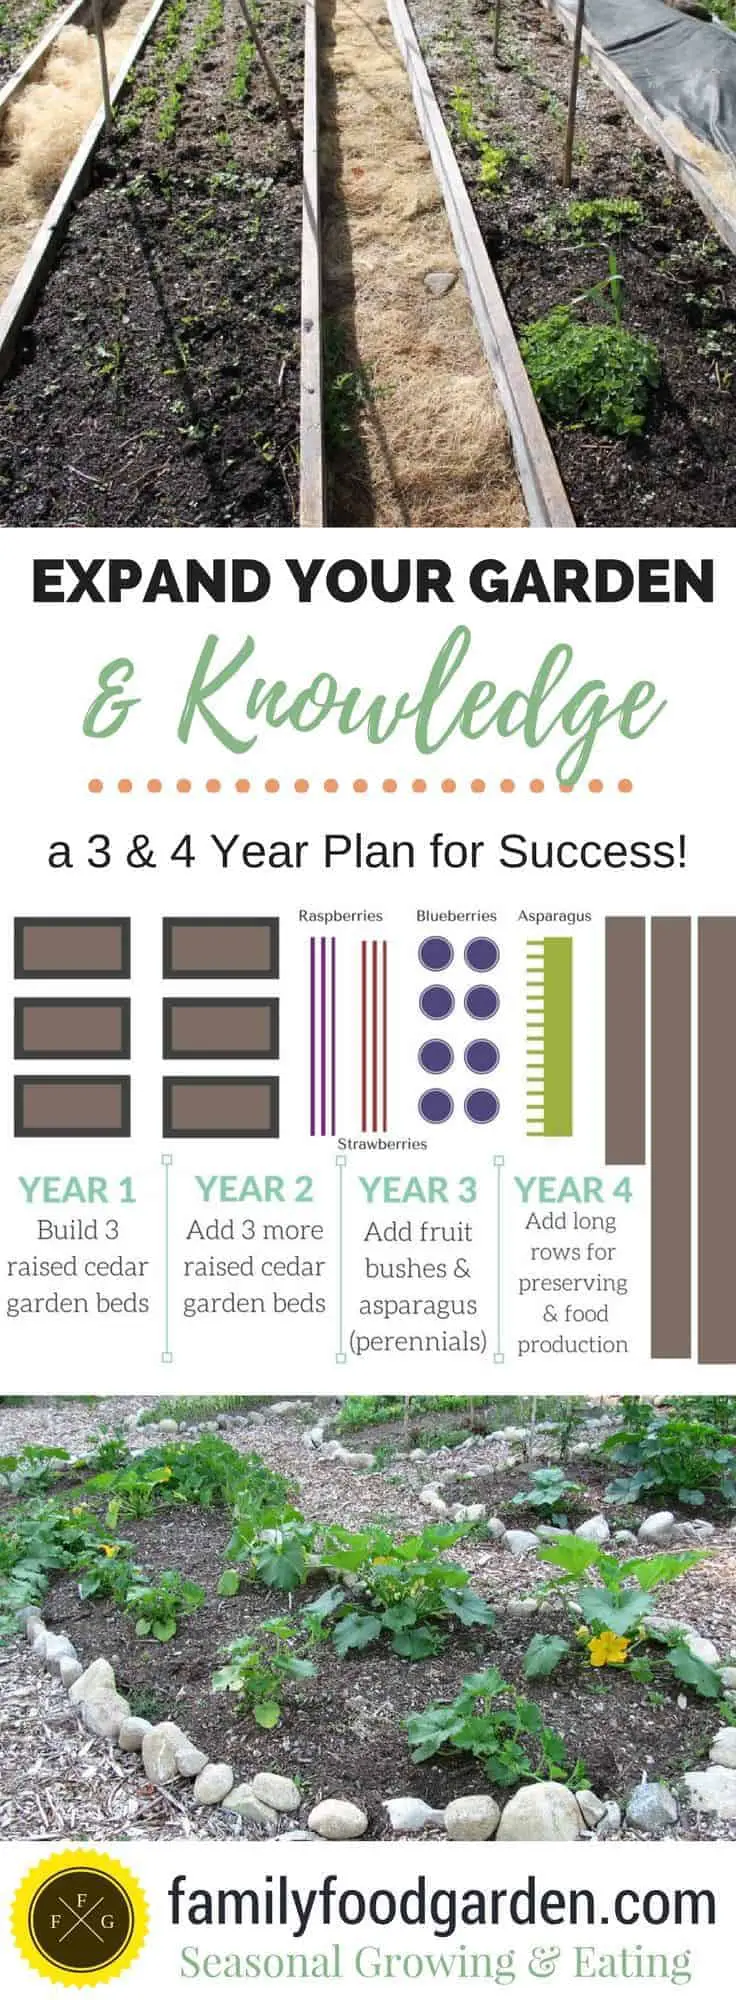 Vegetable Gardening: Expanding your garden and knowledge over the years